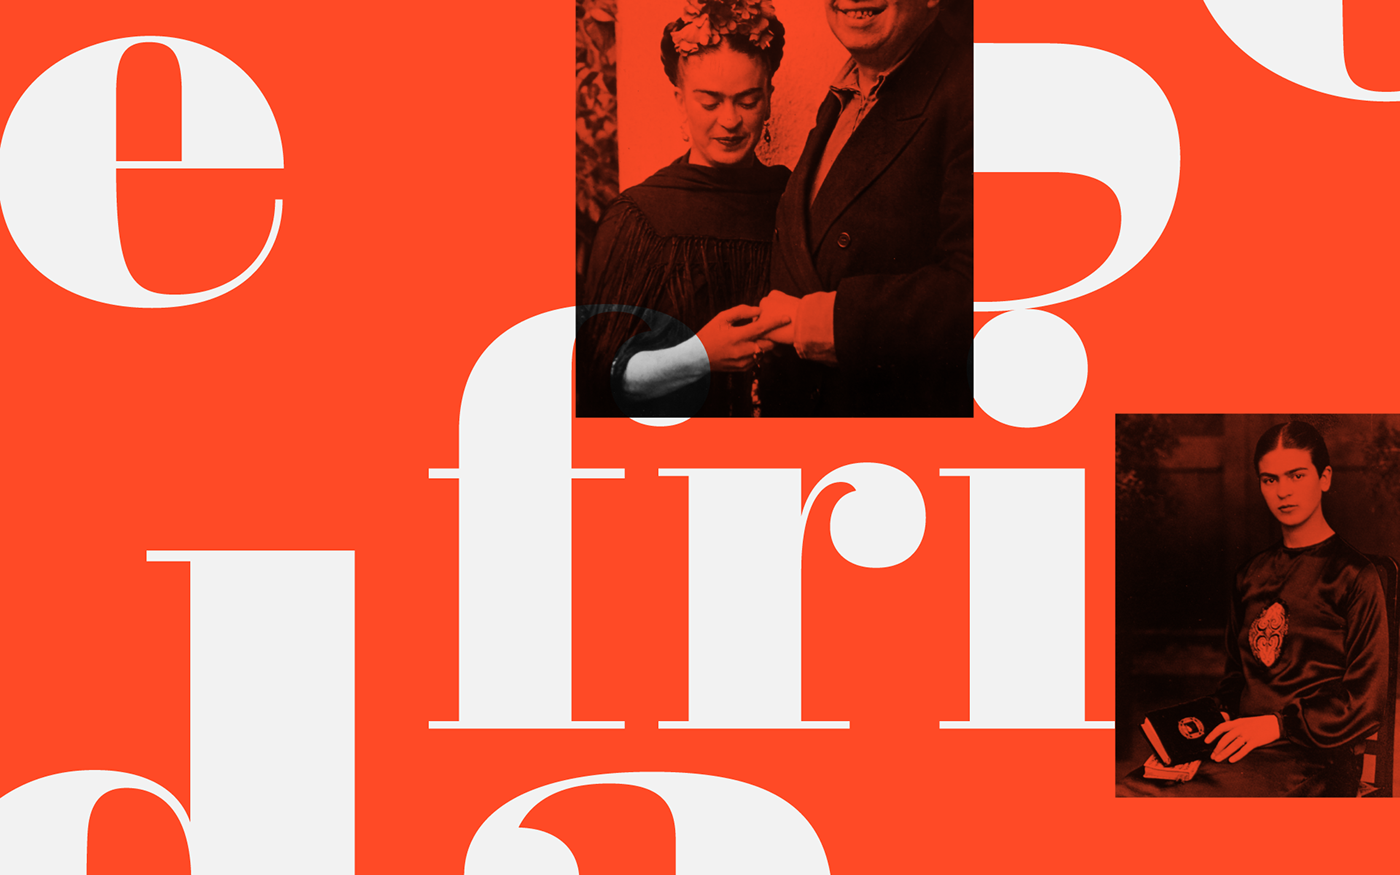 Frida Kahlo diego rivera couple typographic Didone red Photography  Archive Exhibition  Signage